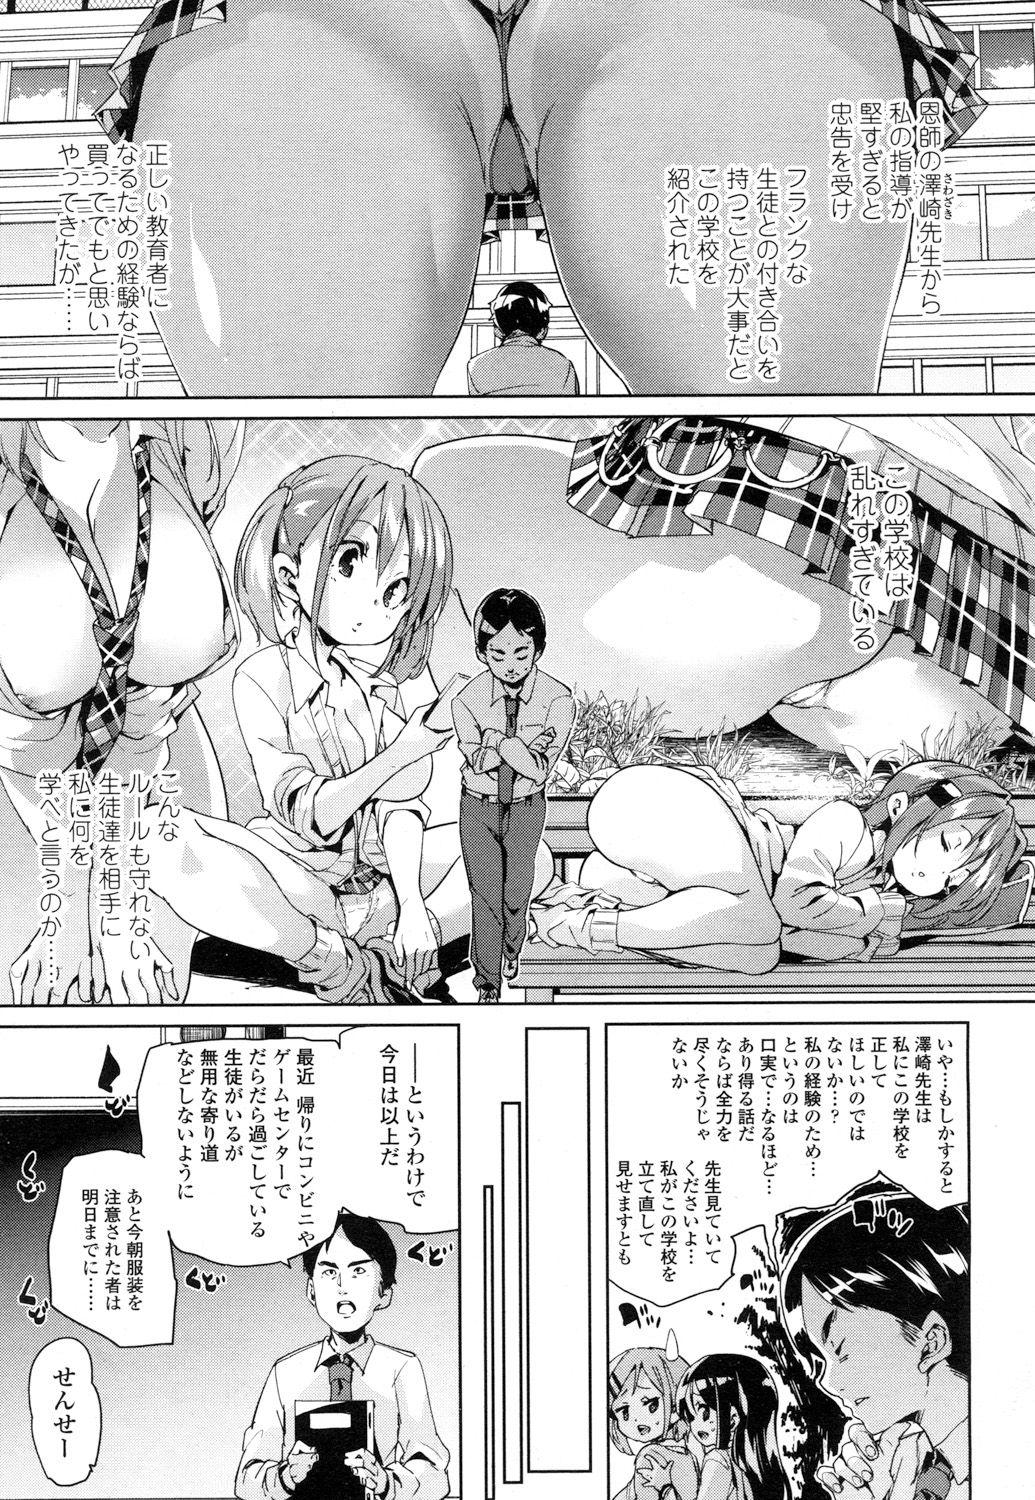 Cum Swallowing Girls forM Vol. 14 Mms - Page 4